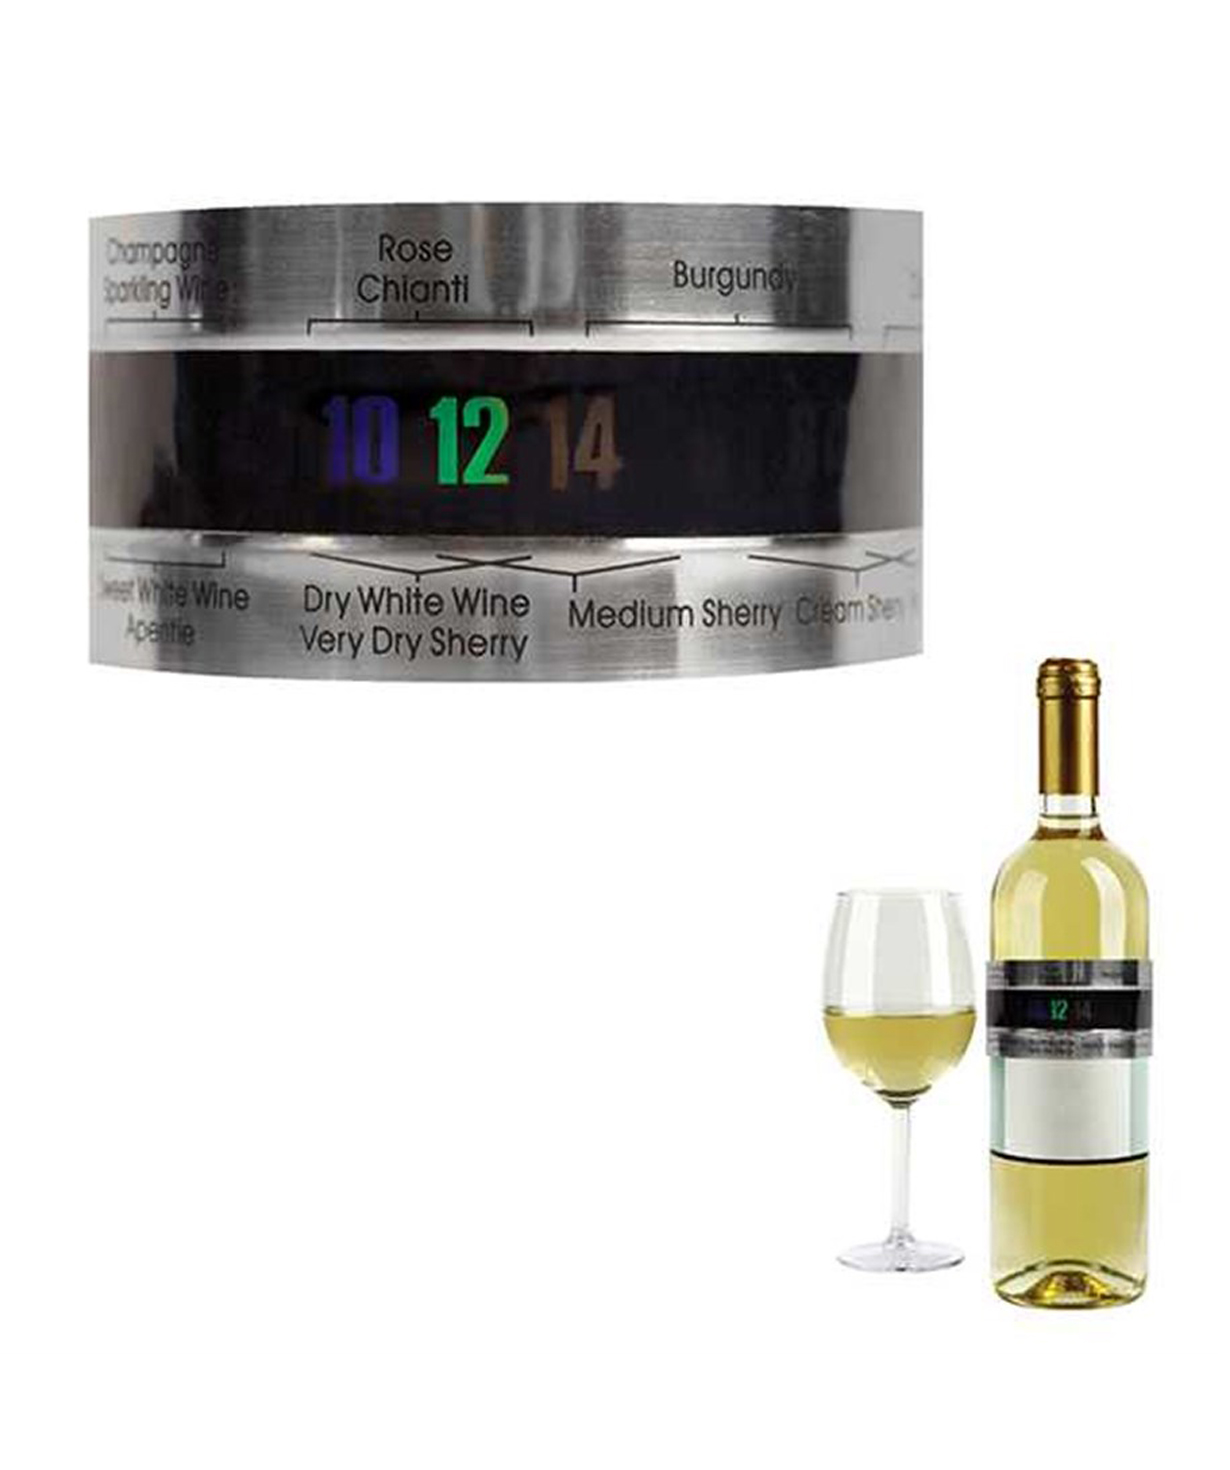 Thermometer «Kikkerland» for wine